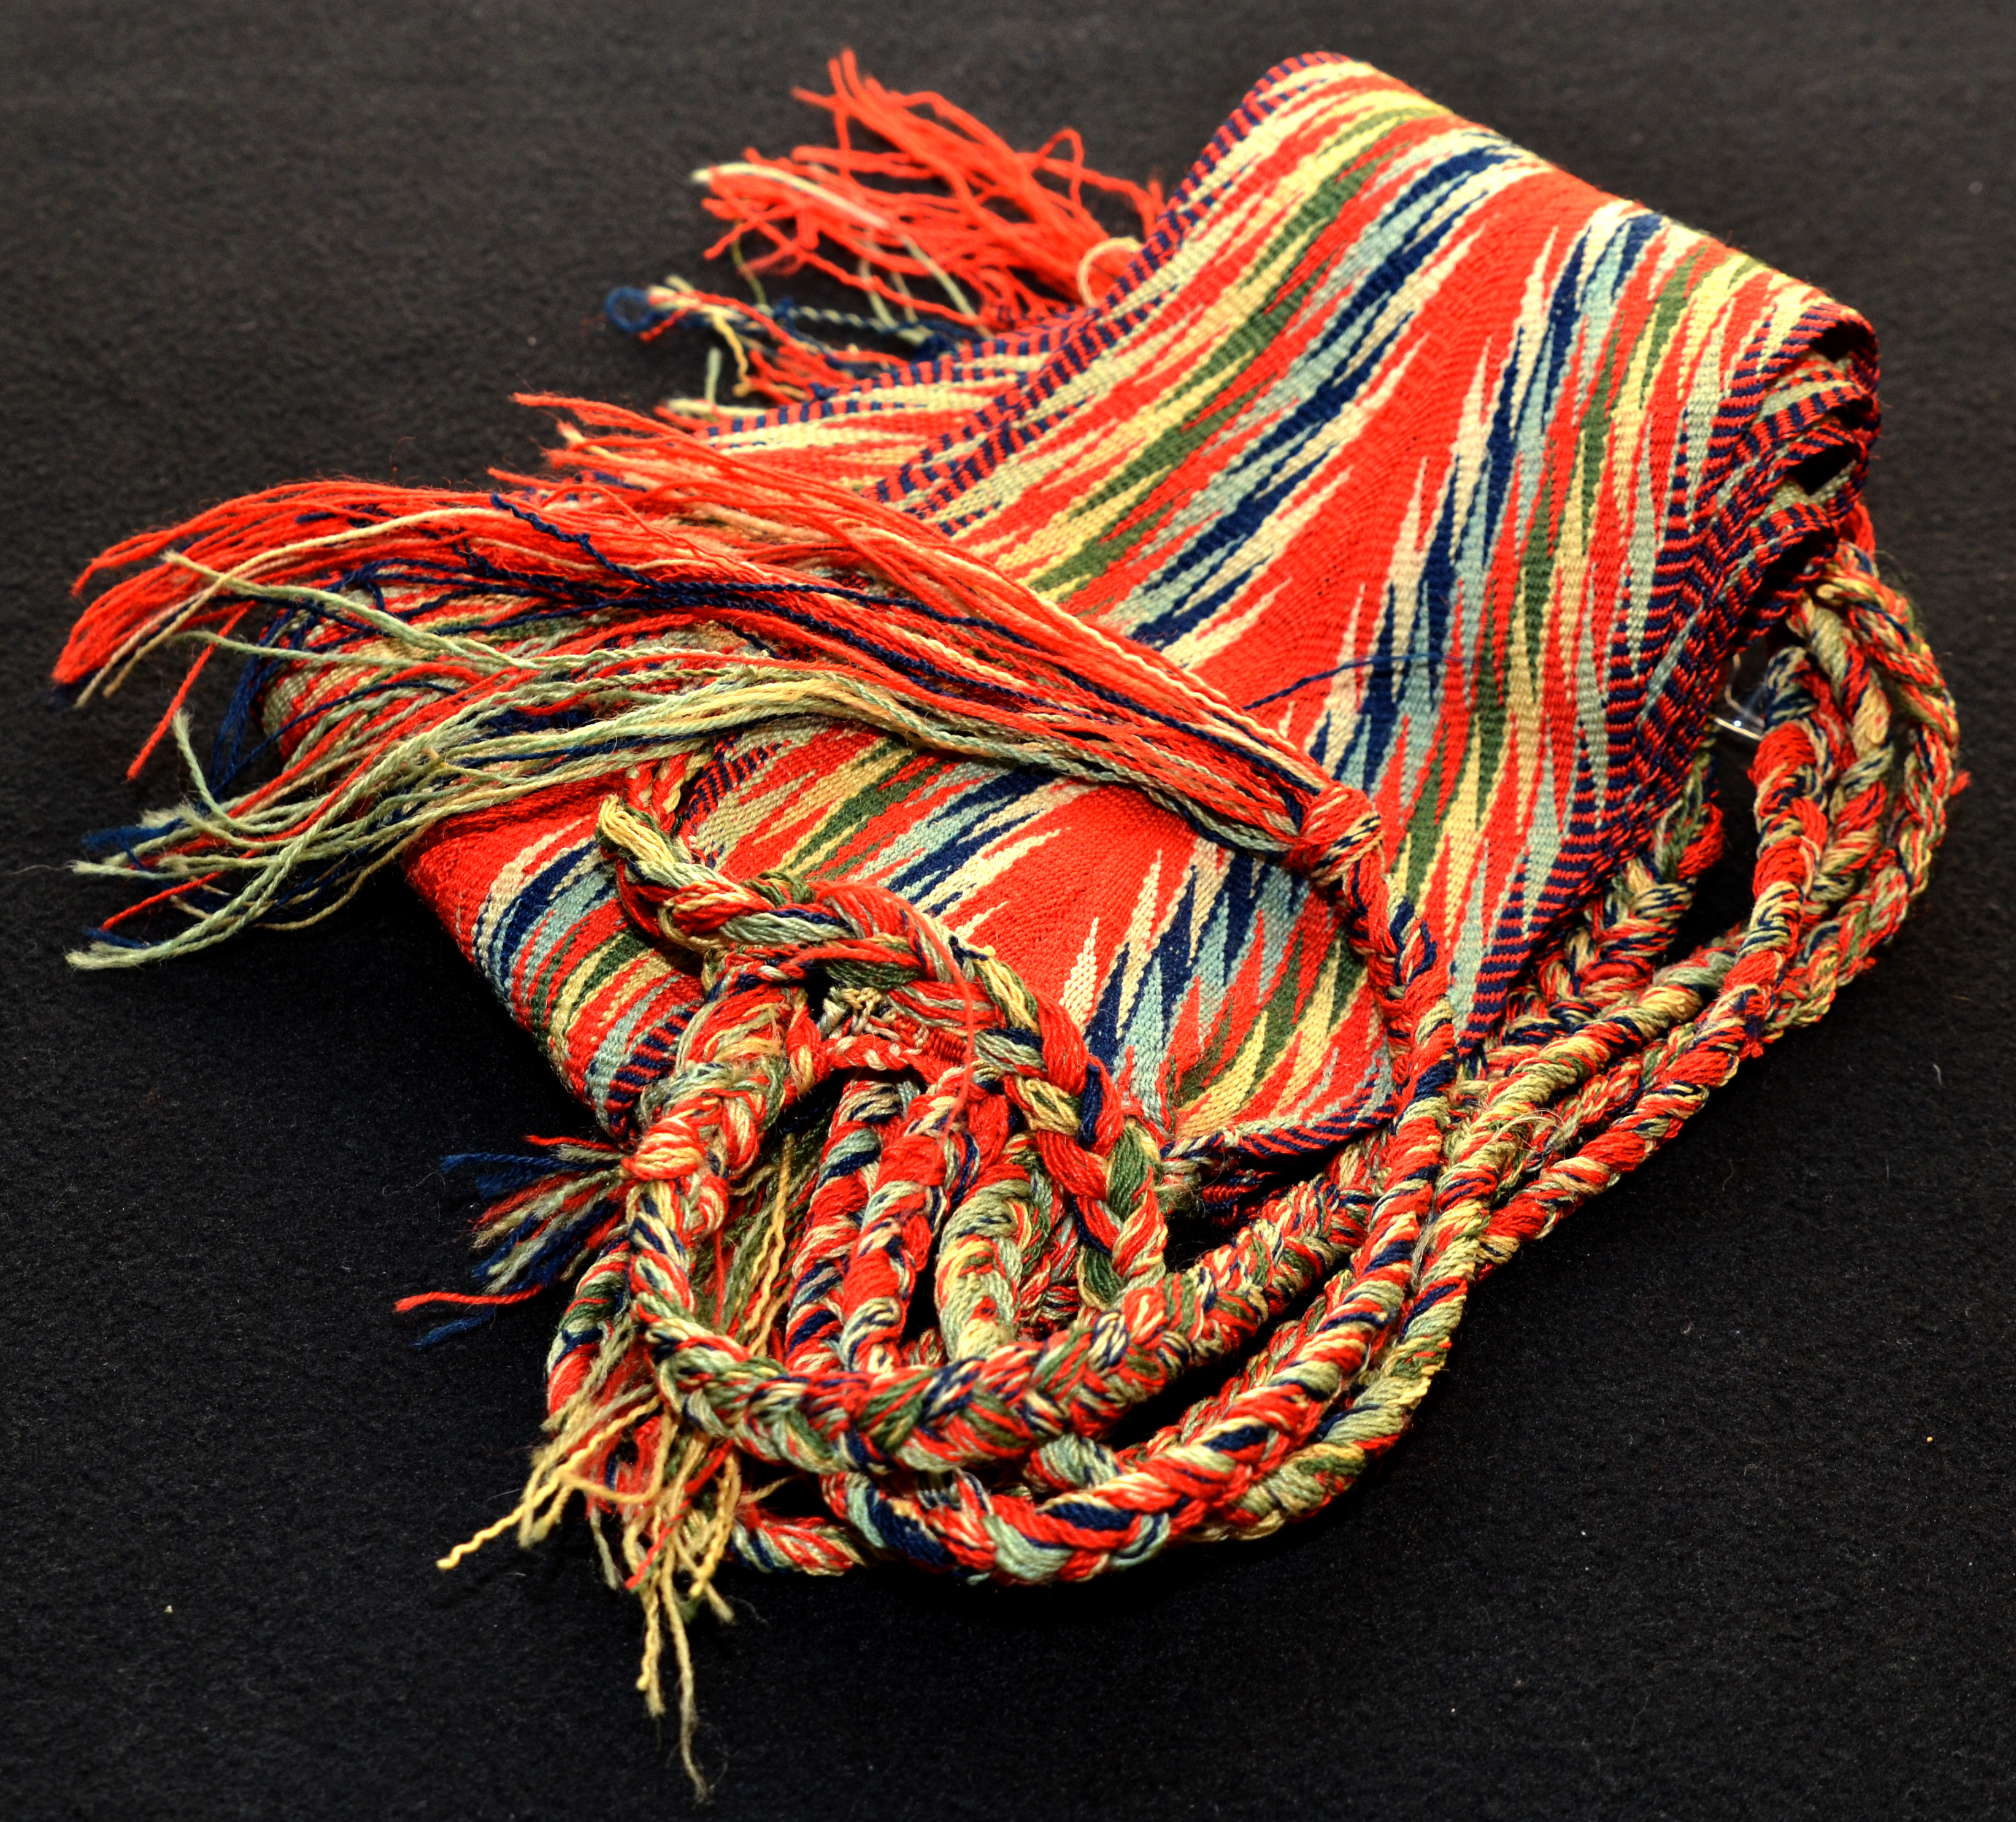 Colour photograph of an arrowhead sash, or ceinture fléchée, around 20 cm wide and 2 m long. The woven pattern looks like lightning bolts or arrowheads. The broad stripe down the middle is bright red, with symmetrical zigzags to the right and left of centre. On each end is a long fringe of three woollen braids.